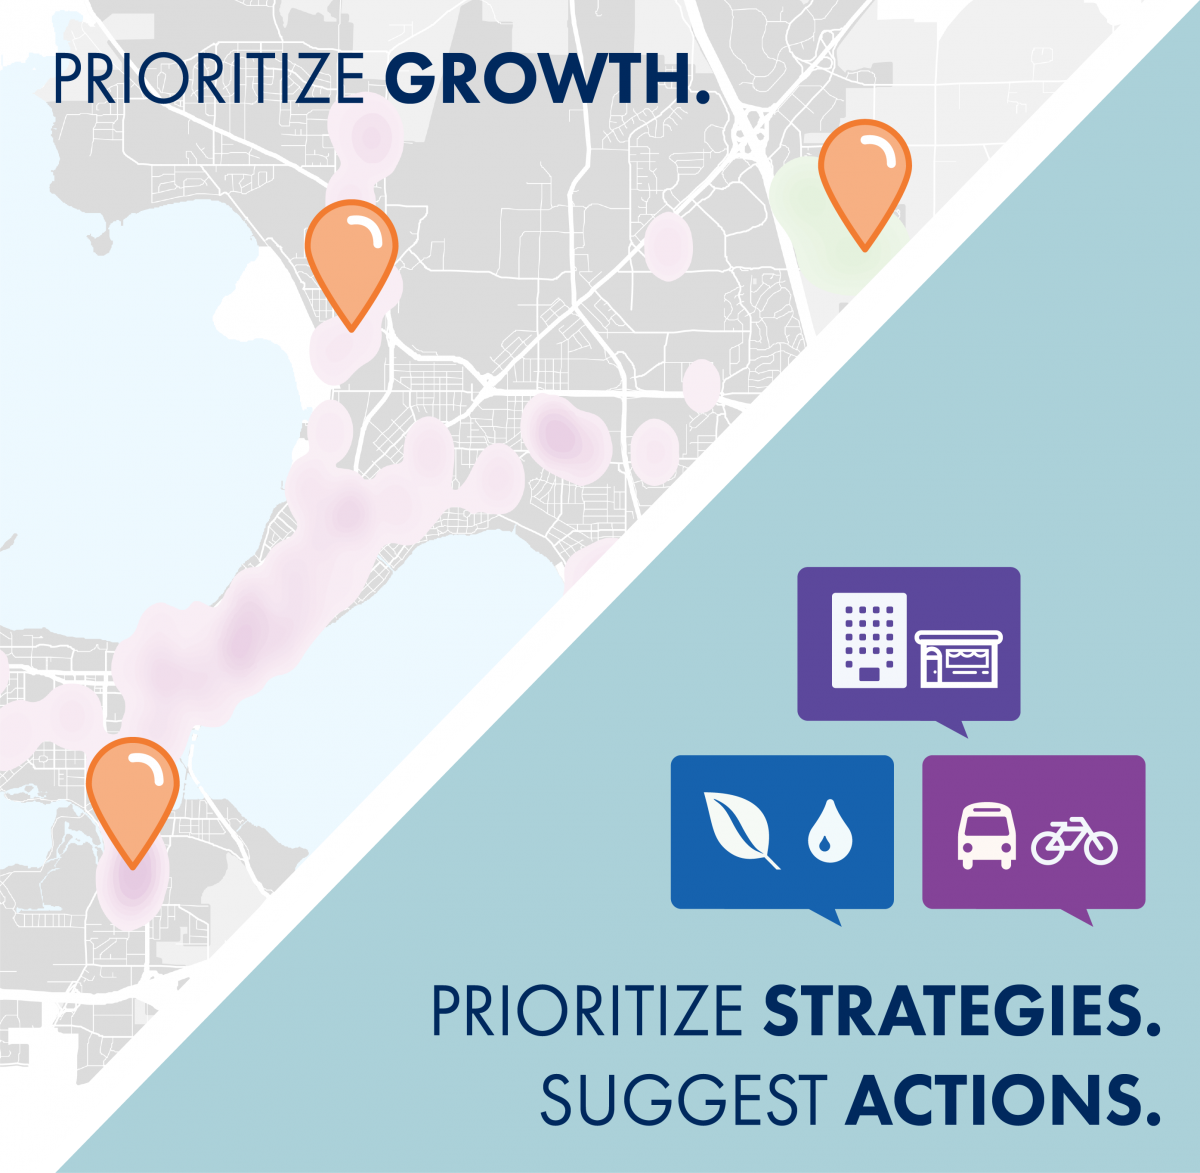 Prioritize Growth. Prioritize strategies. Suggest Actions.